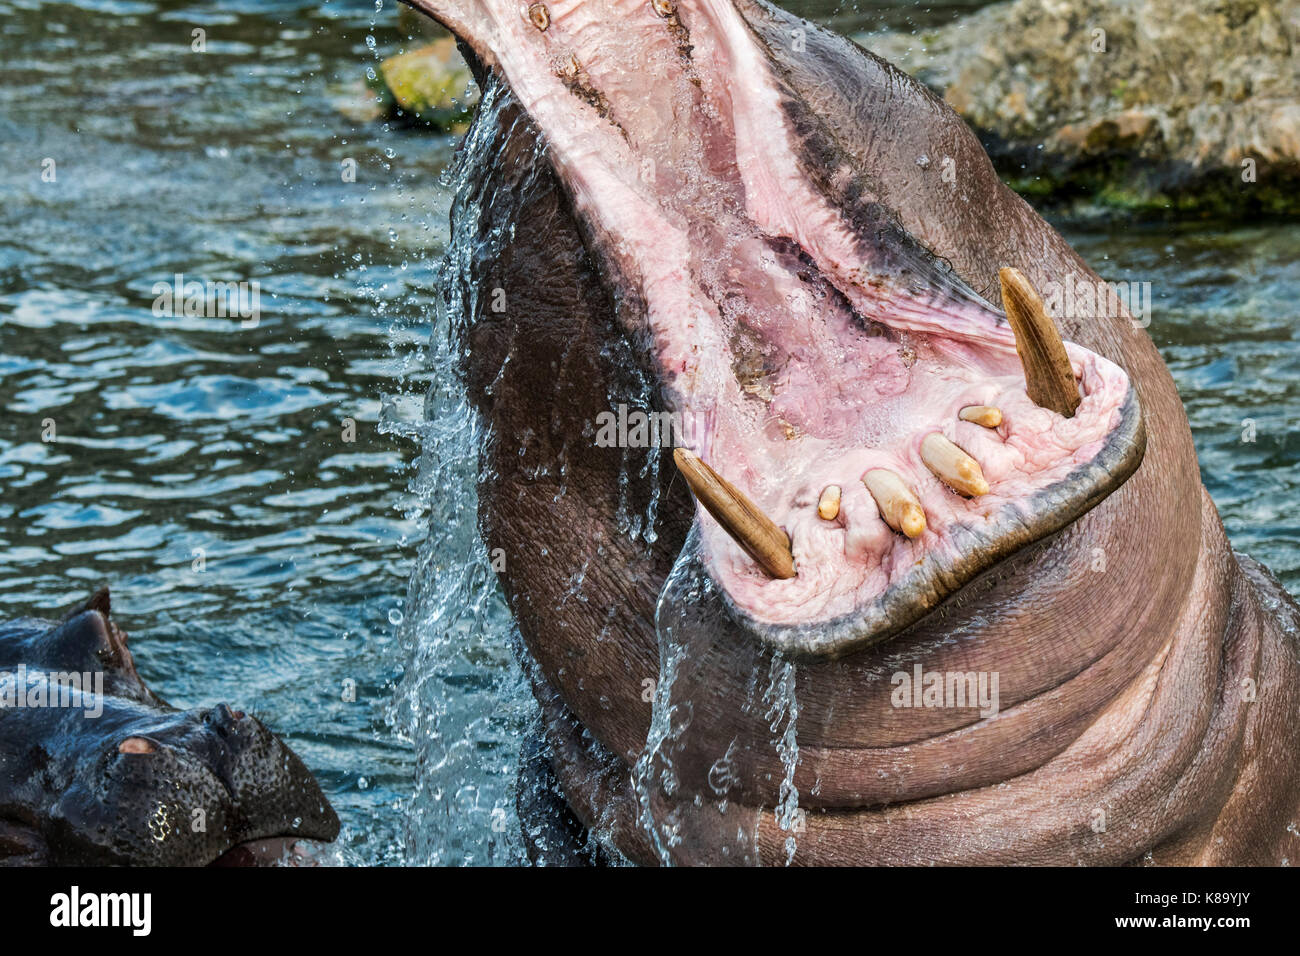 Common hippopotamus / hippo (Hippopotamus amphibius) in lake showing huge teeth and large canine tusks in wide open mouth Stock Photo